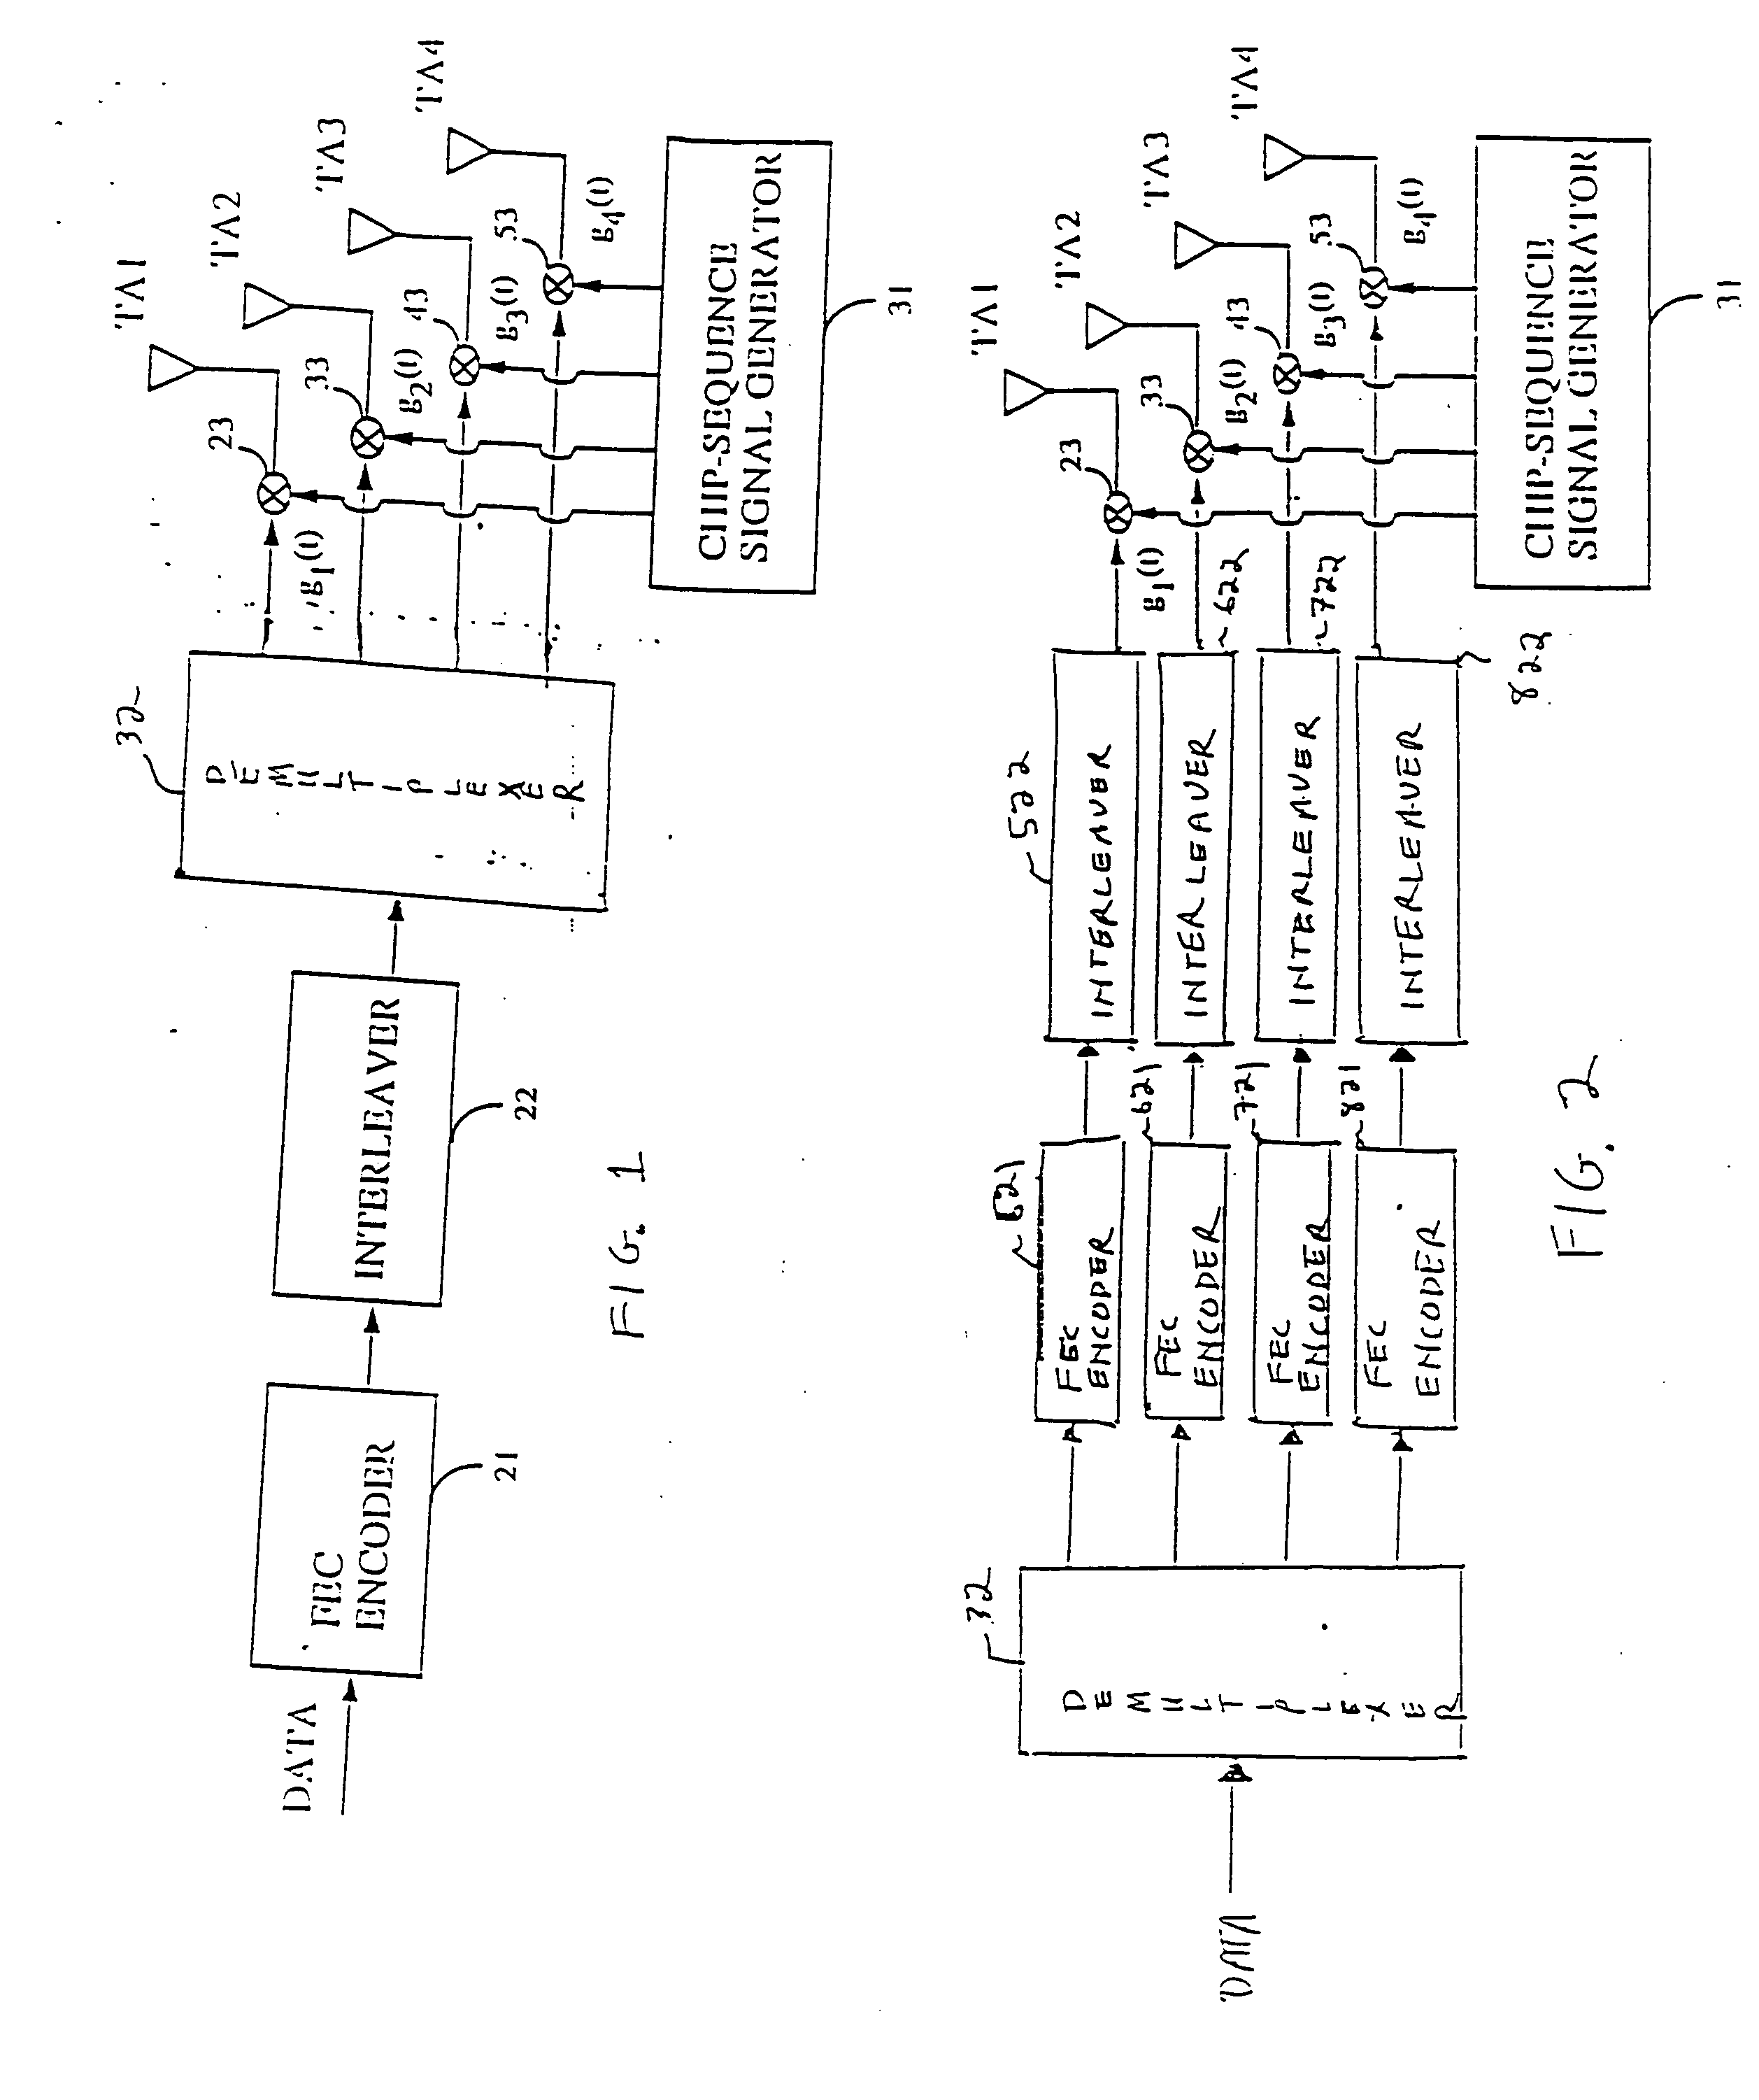 Multiple-input multiple-output (MIMO) spread-spectrum system and method